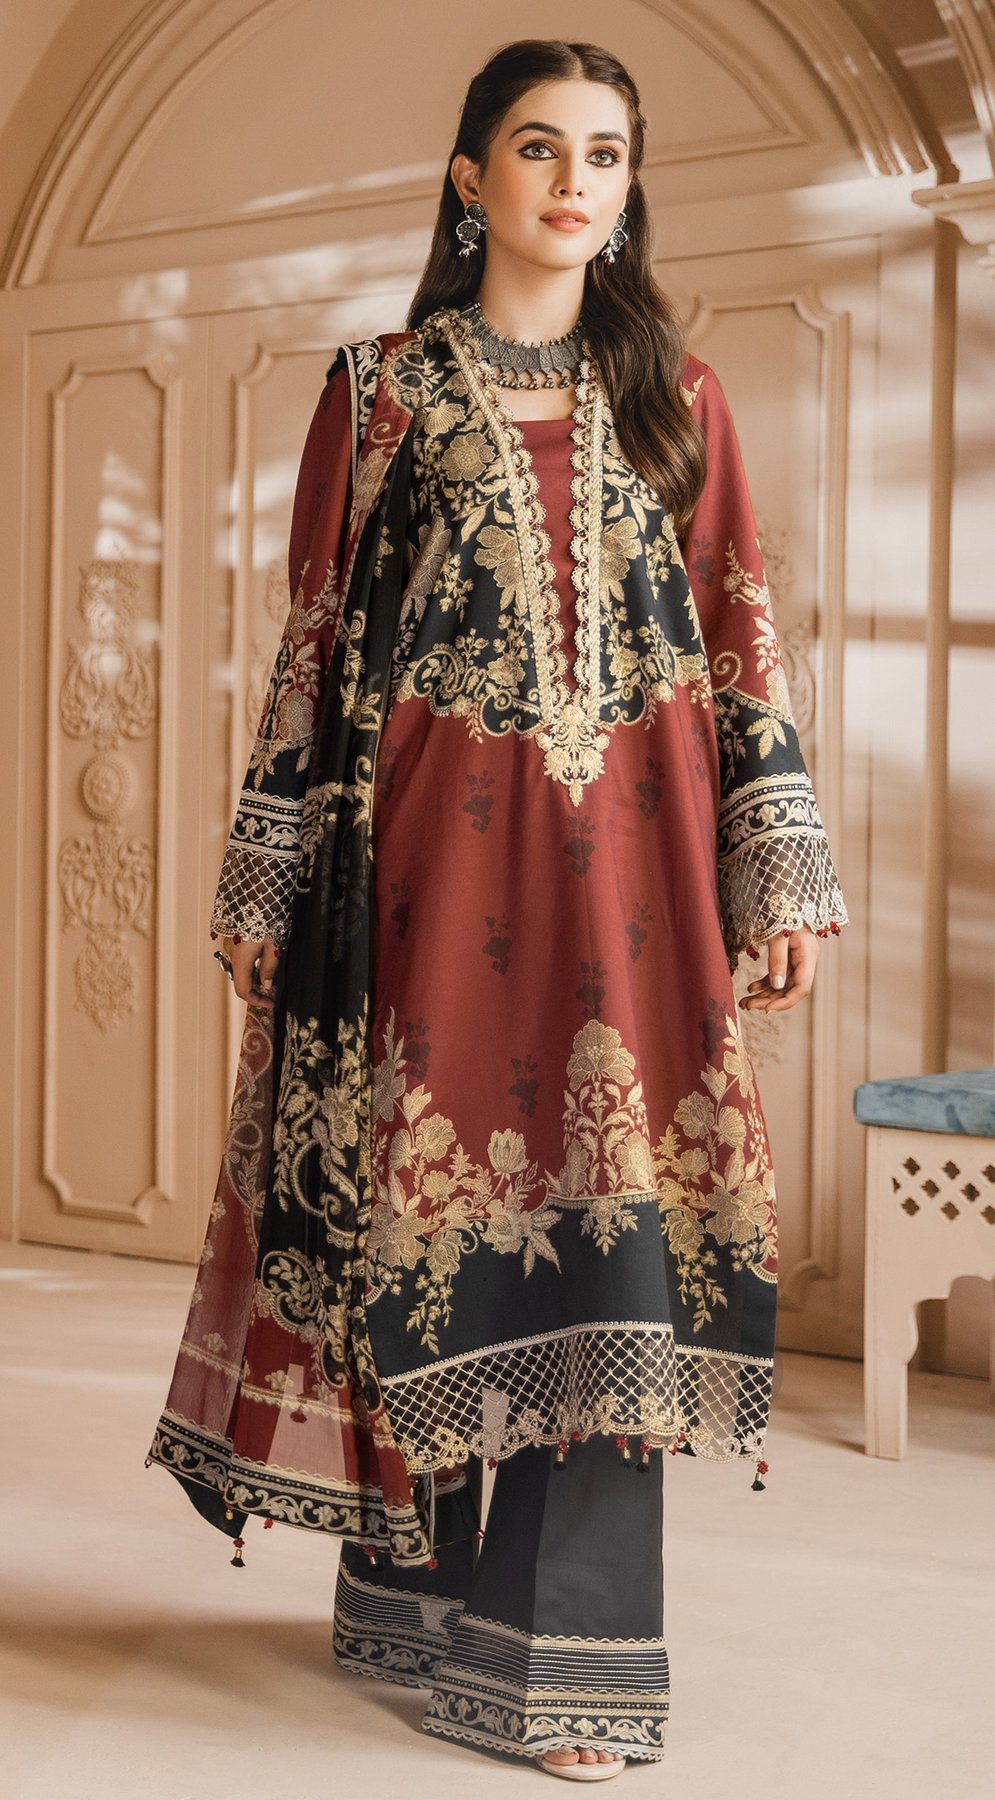 Aliya | Anaya by Kiran Chaudhry | Noor Bano | Unstitched Embroidered Cambric Collection'21